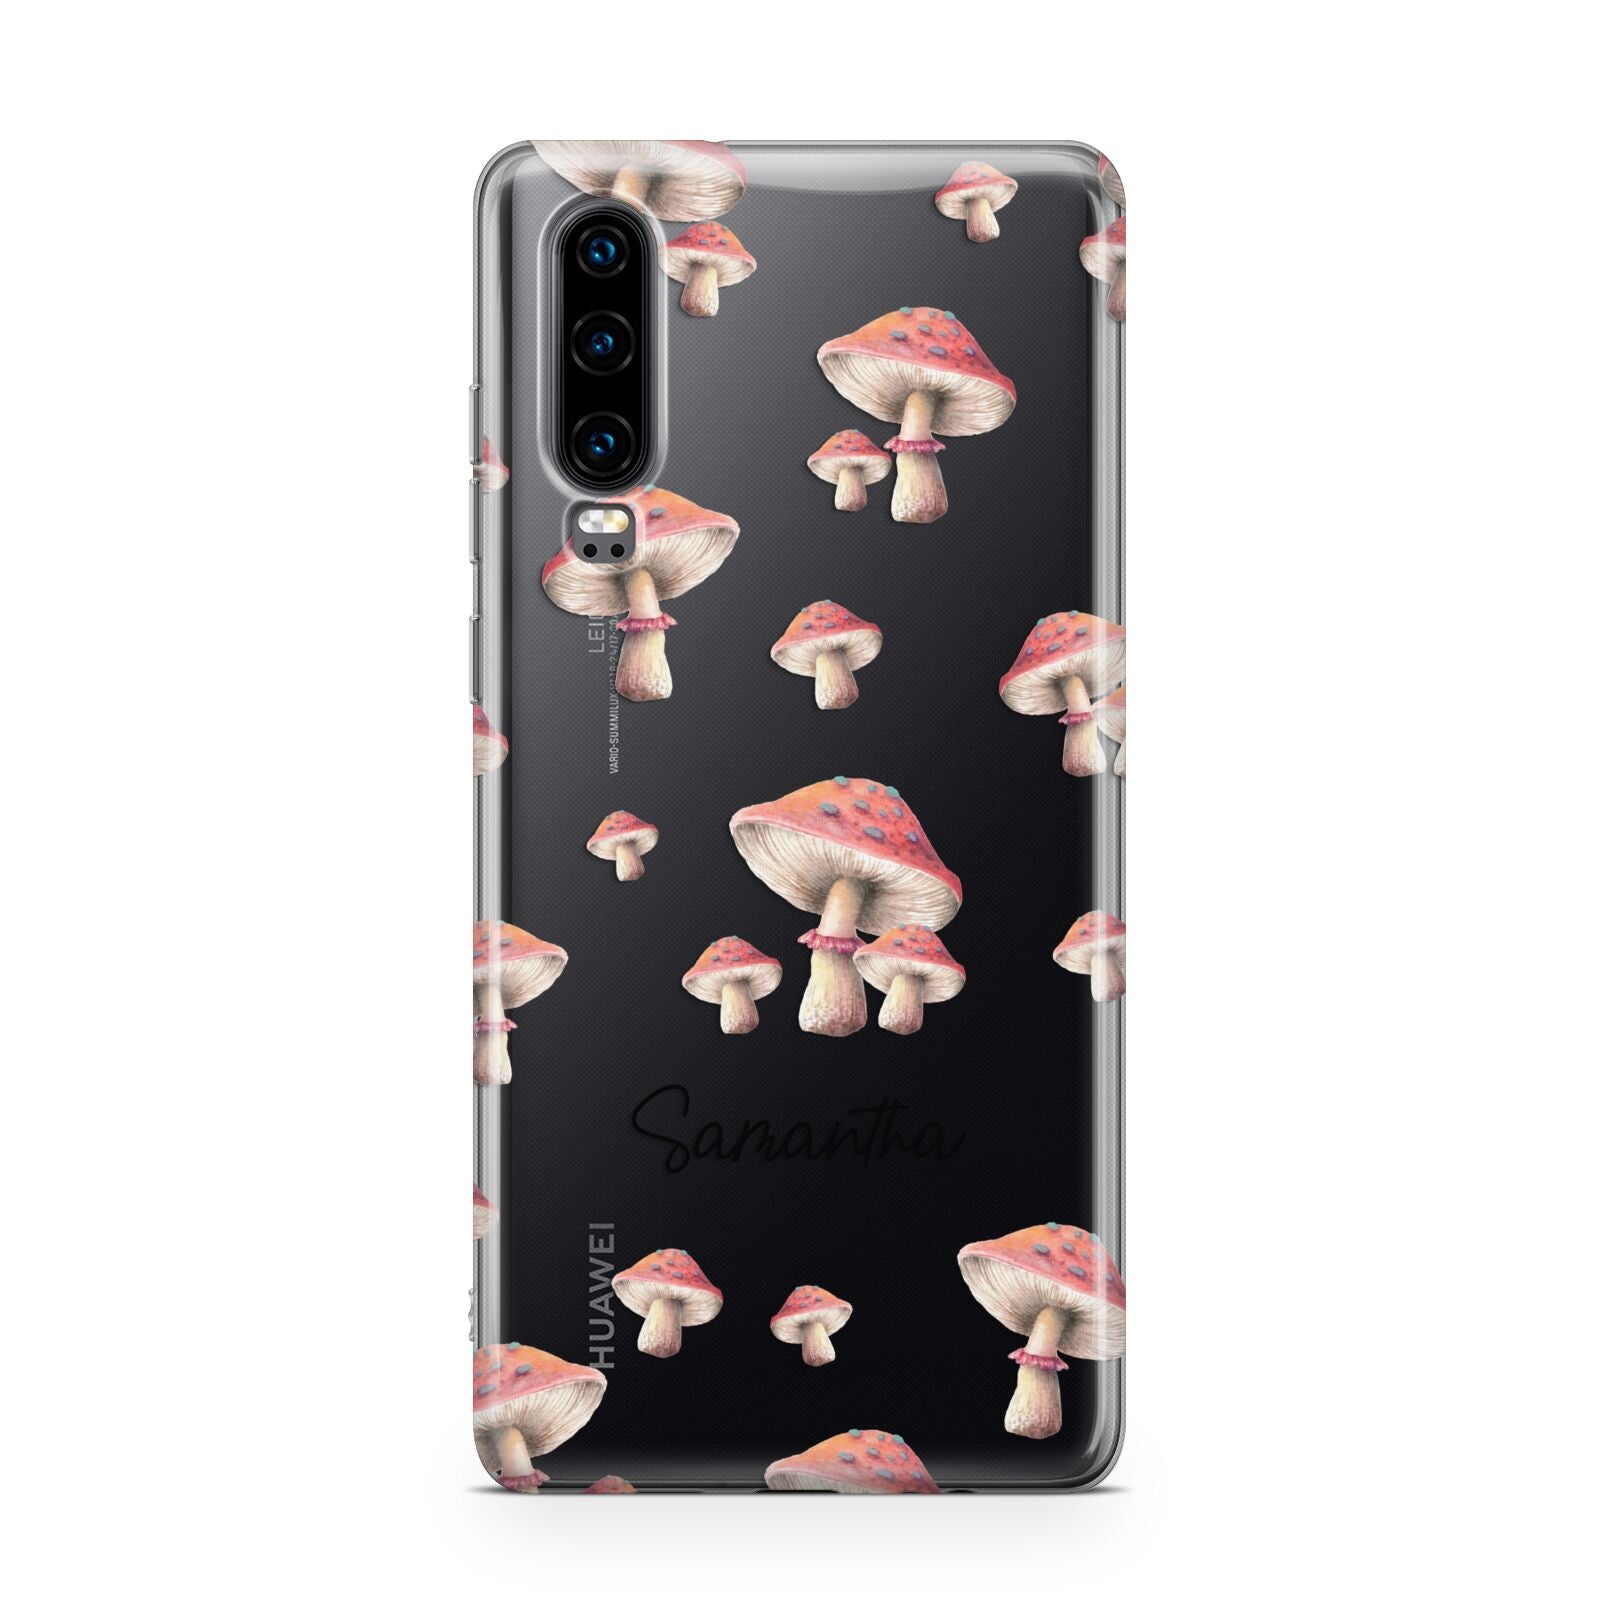 Mushroom Illustrations with Name Huawei P30 Phone Case